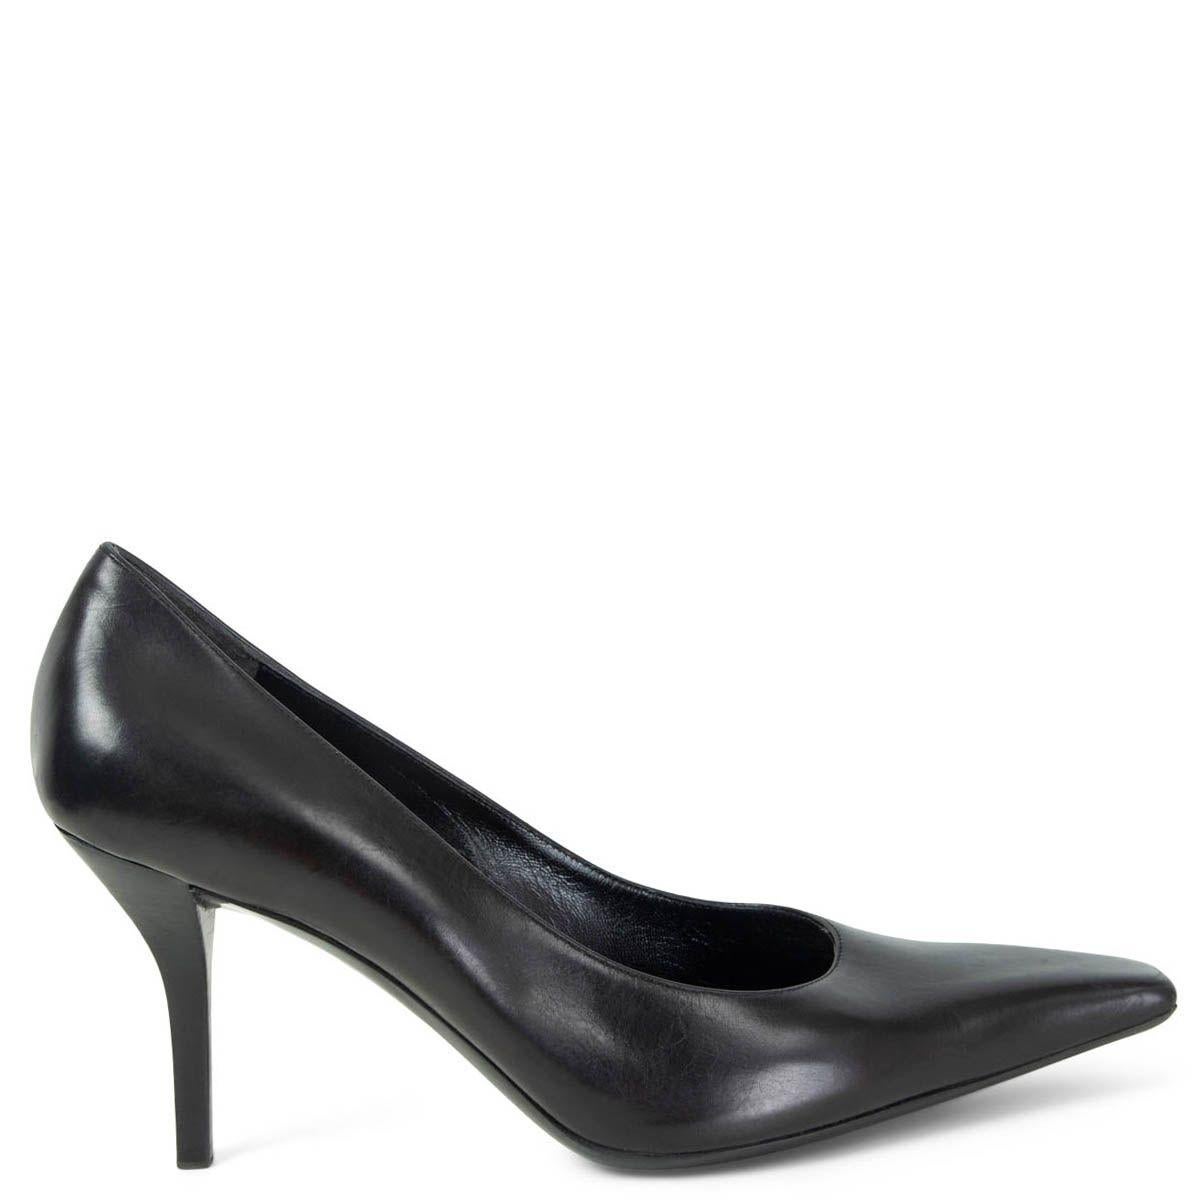 100% authentic Gucci by Tom Ford pointed square-toe pumps in black smooth calfskin embellished with silver-tone metal logo on the right pump. Have been worn once inside and show some scratches on the top of the right heel and on the side of the left